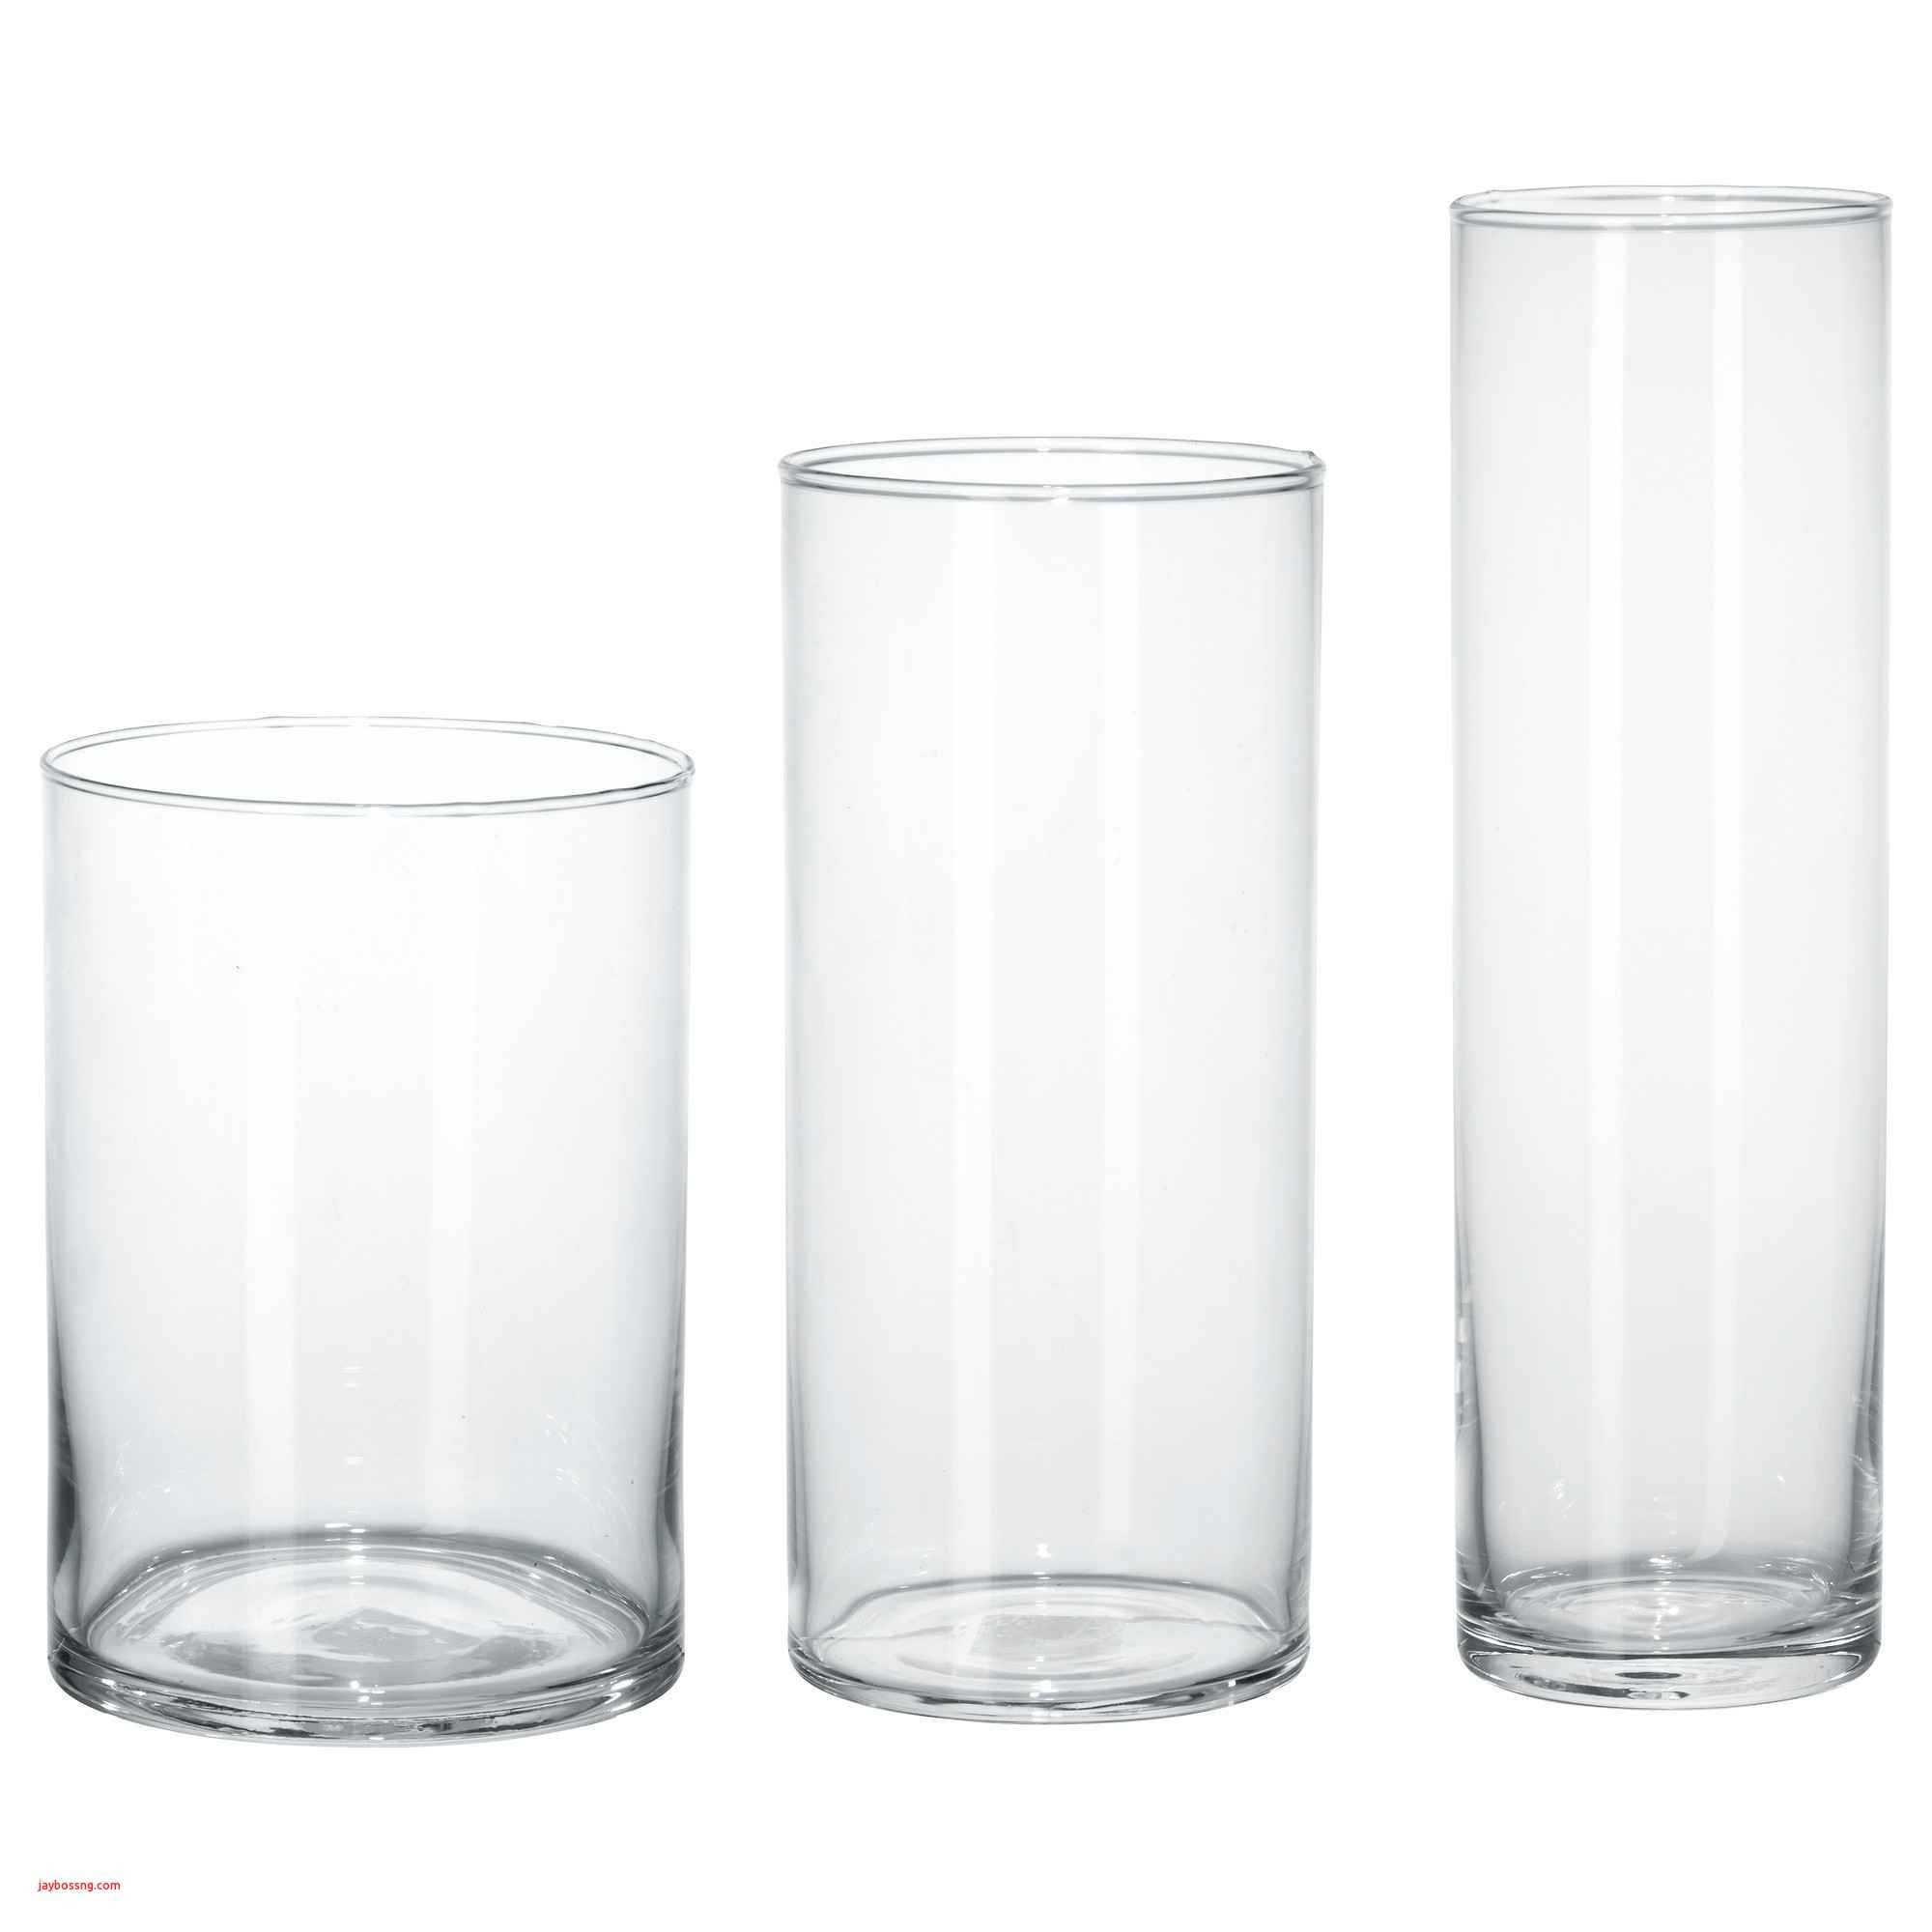 10 Lovable Amazon Clear Glass Vases 2024 free download amazon clear glass vases of brown glass vase fresh ikea white table created pe s5h vases ikea throughout brown glass vase fresh ikea white table created pe s5h vases ikea vase i 0d bladet